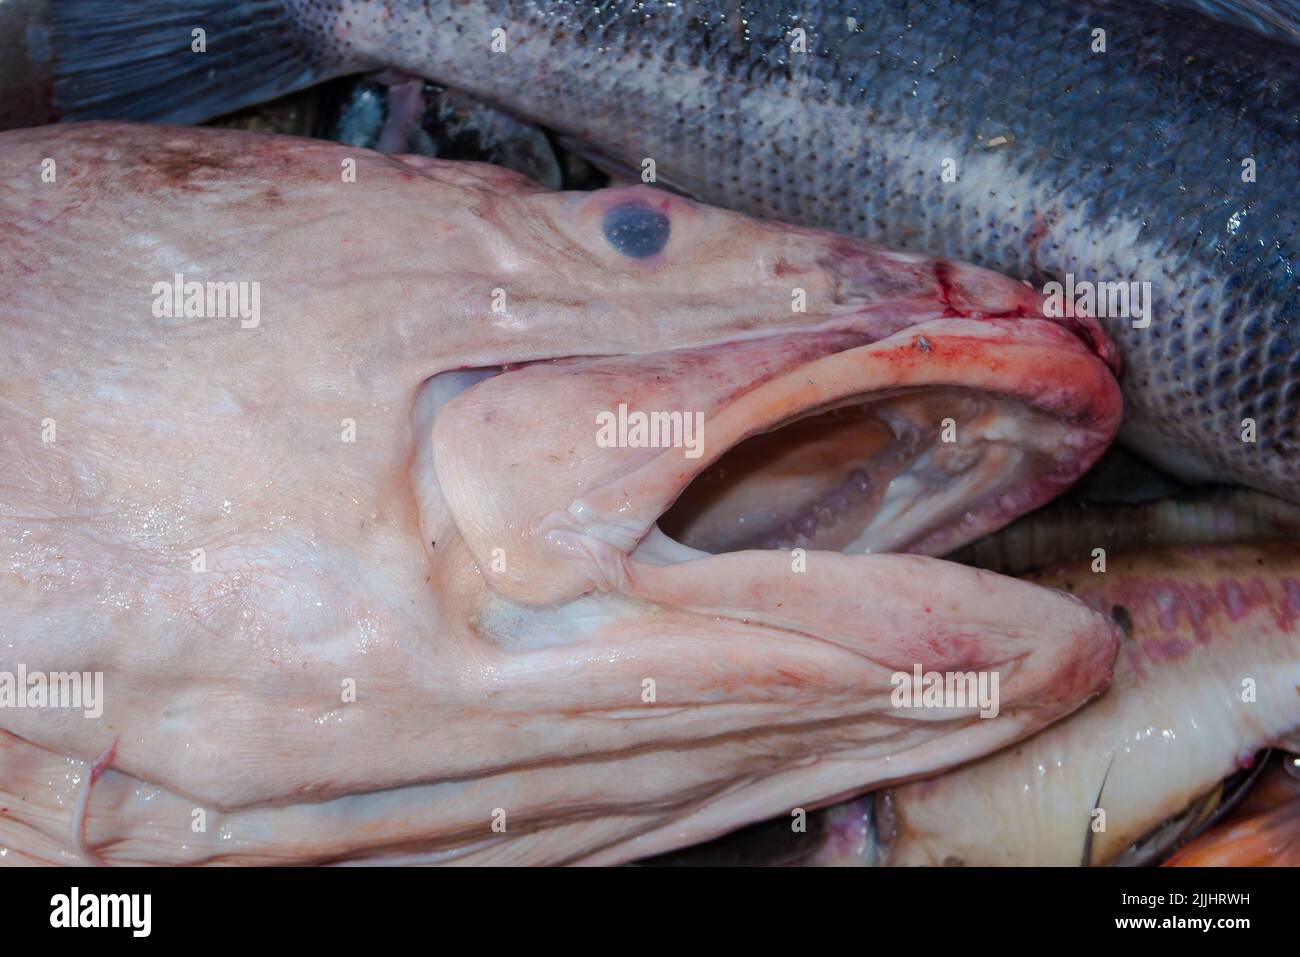 A Look at life in New Zealand: Freshly landed catch, from a deep-sea fishing trawler: Ling (Genypterus blacodes). Stock Photo